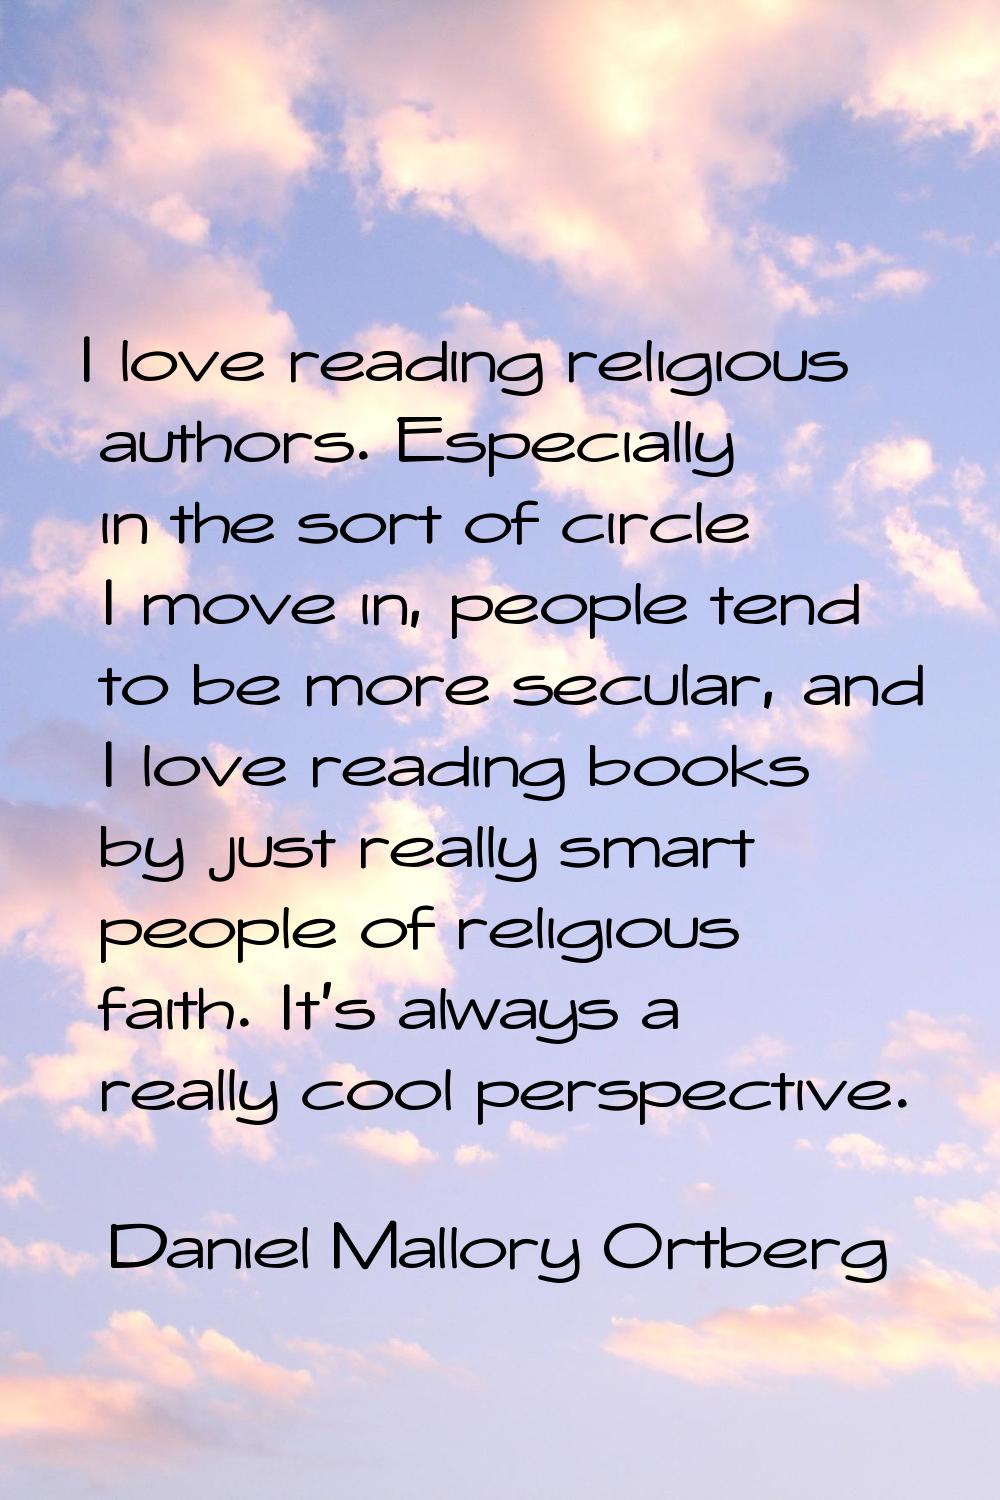 I love reading religious authors. Especially in the sort of circle I move in, people tend to be mor